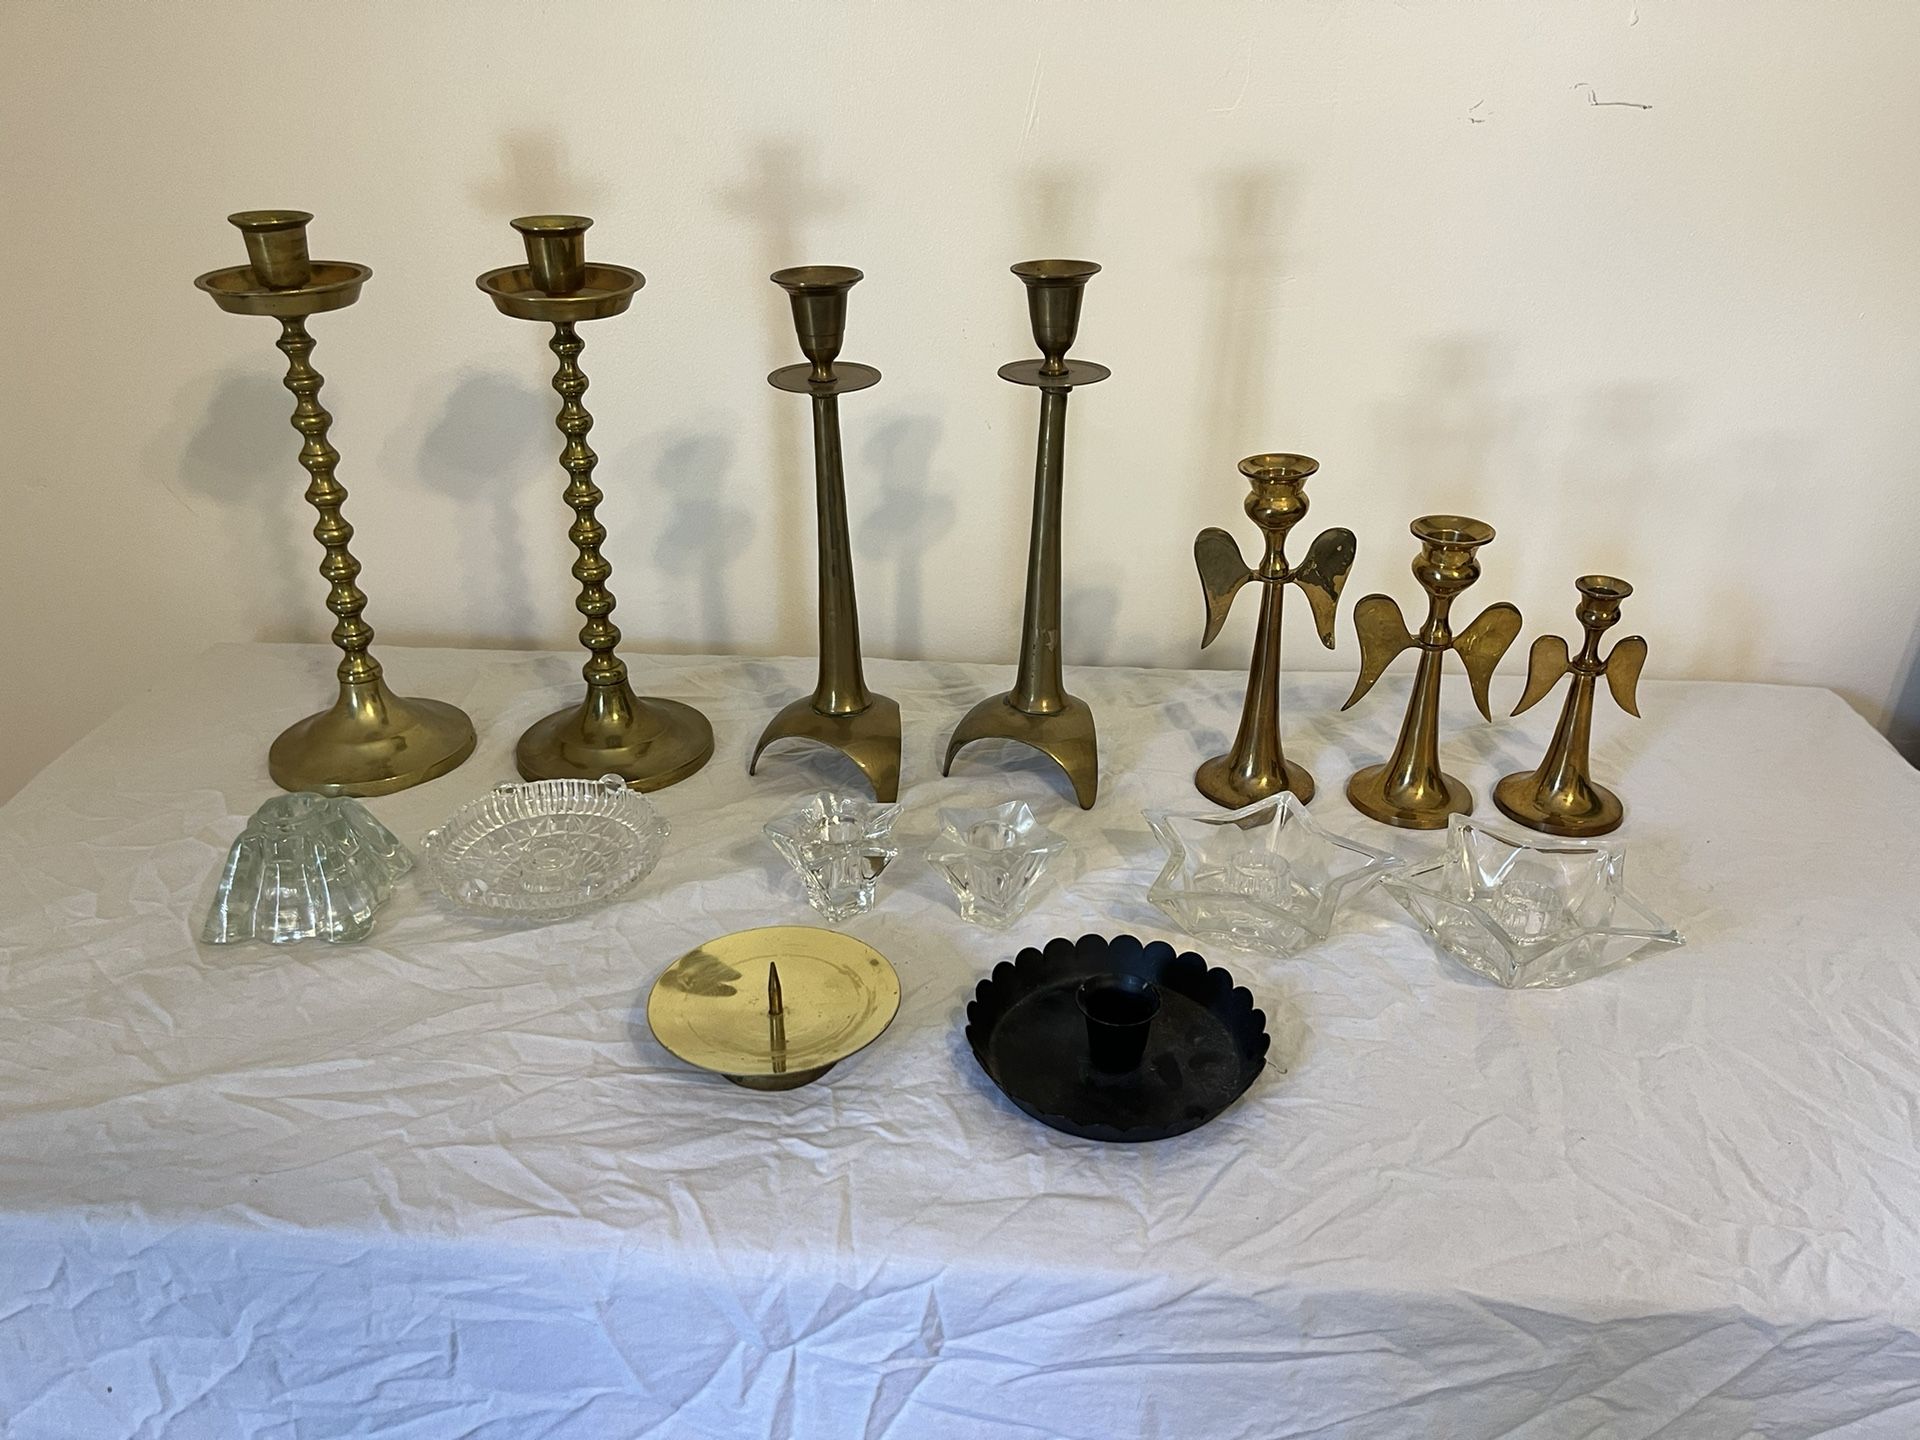 Candle Holder Collection